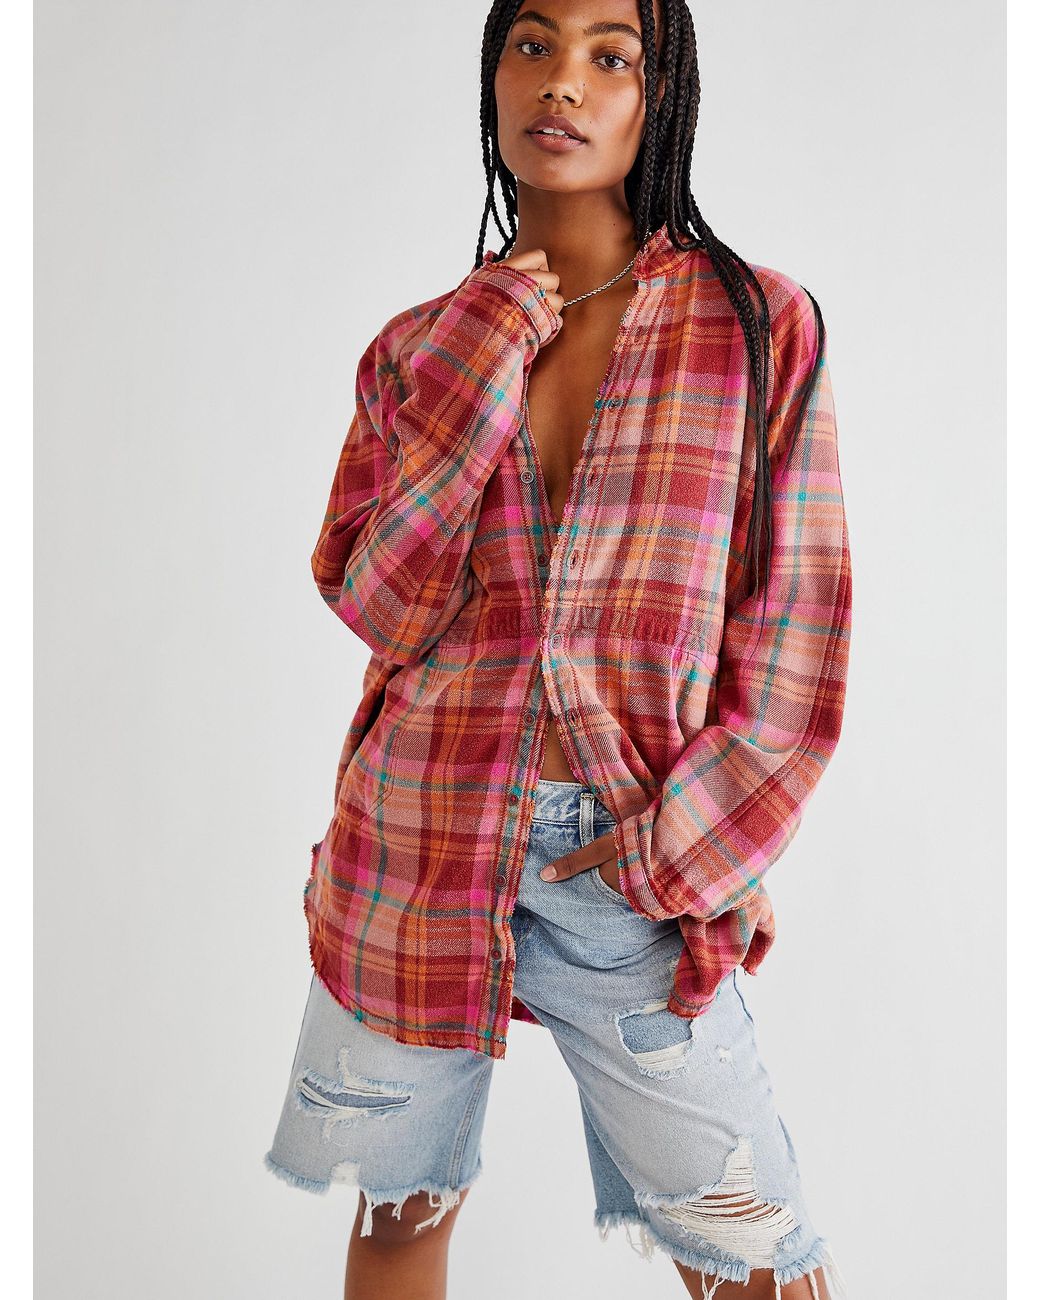 Free People Cotton We The Free Summer Daydream Plaid Buttondown | Lyst